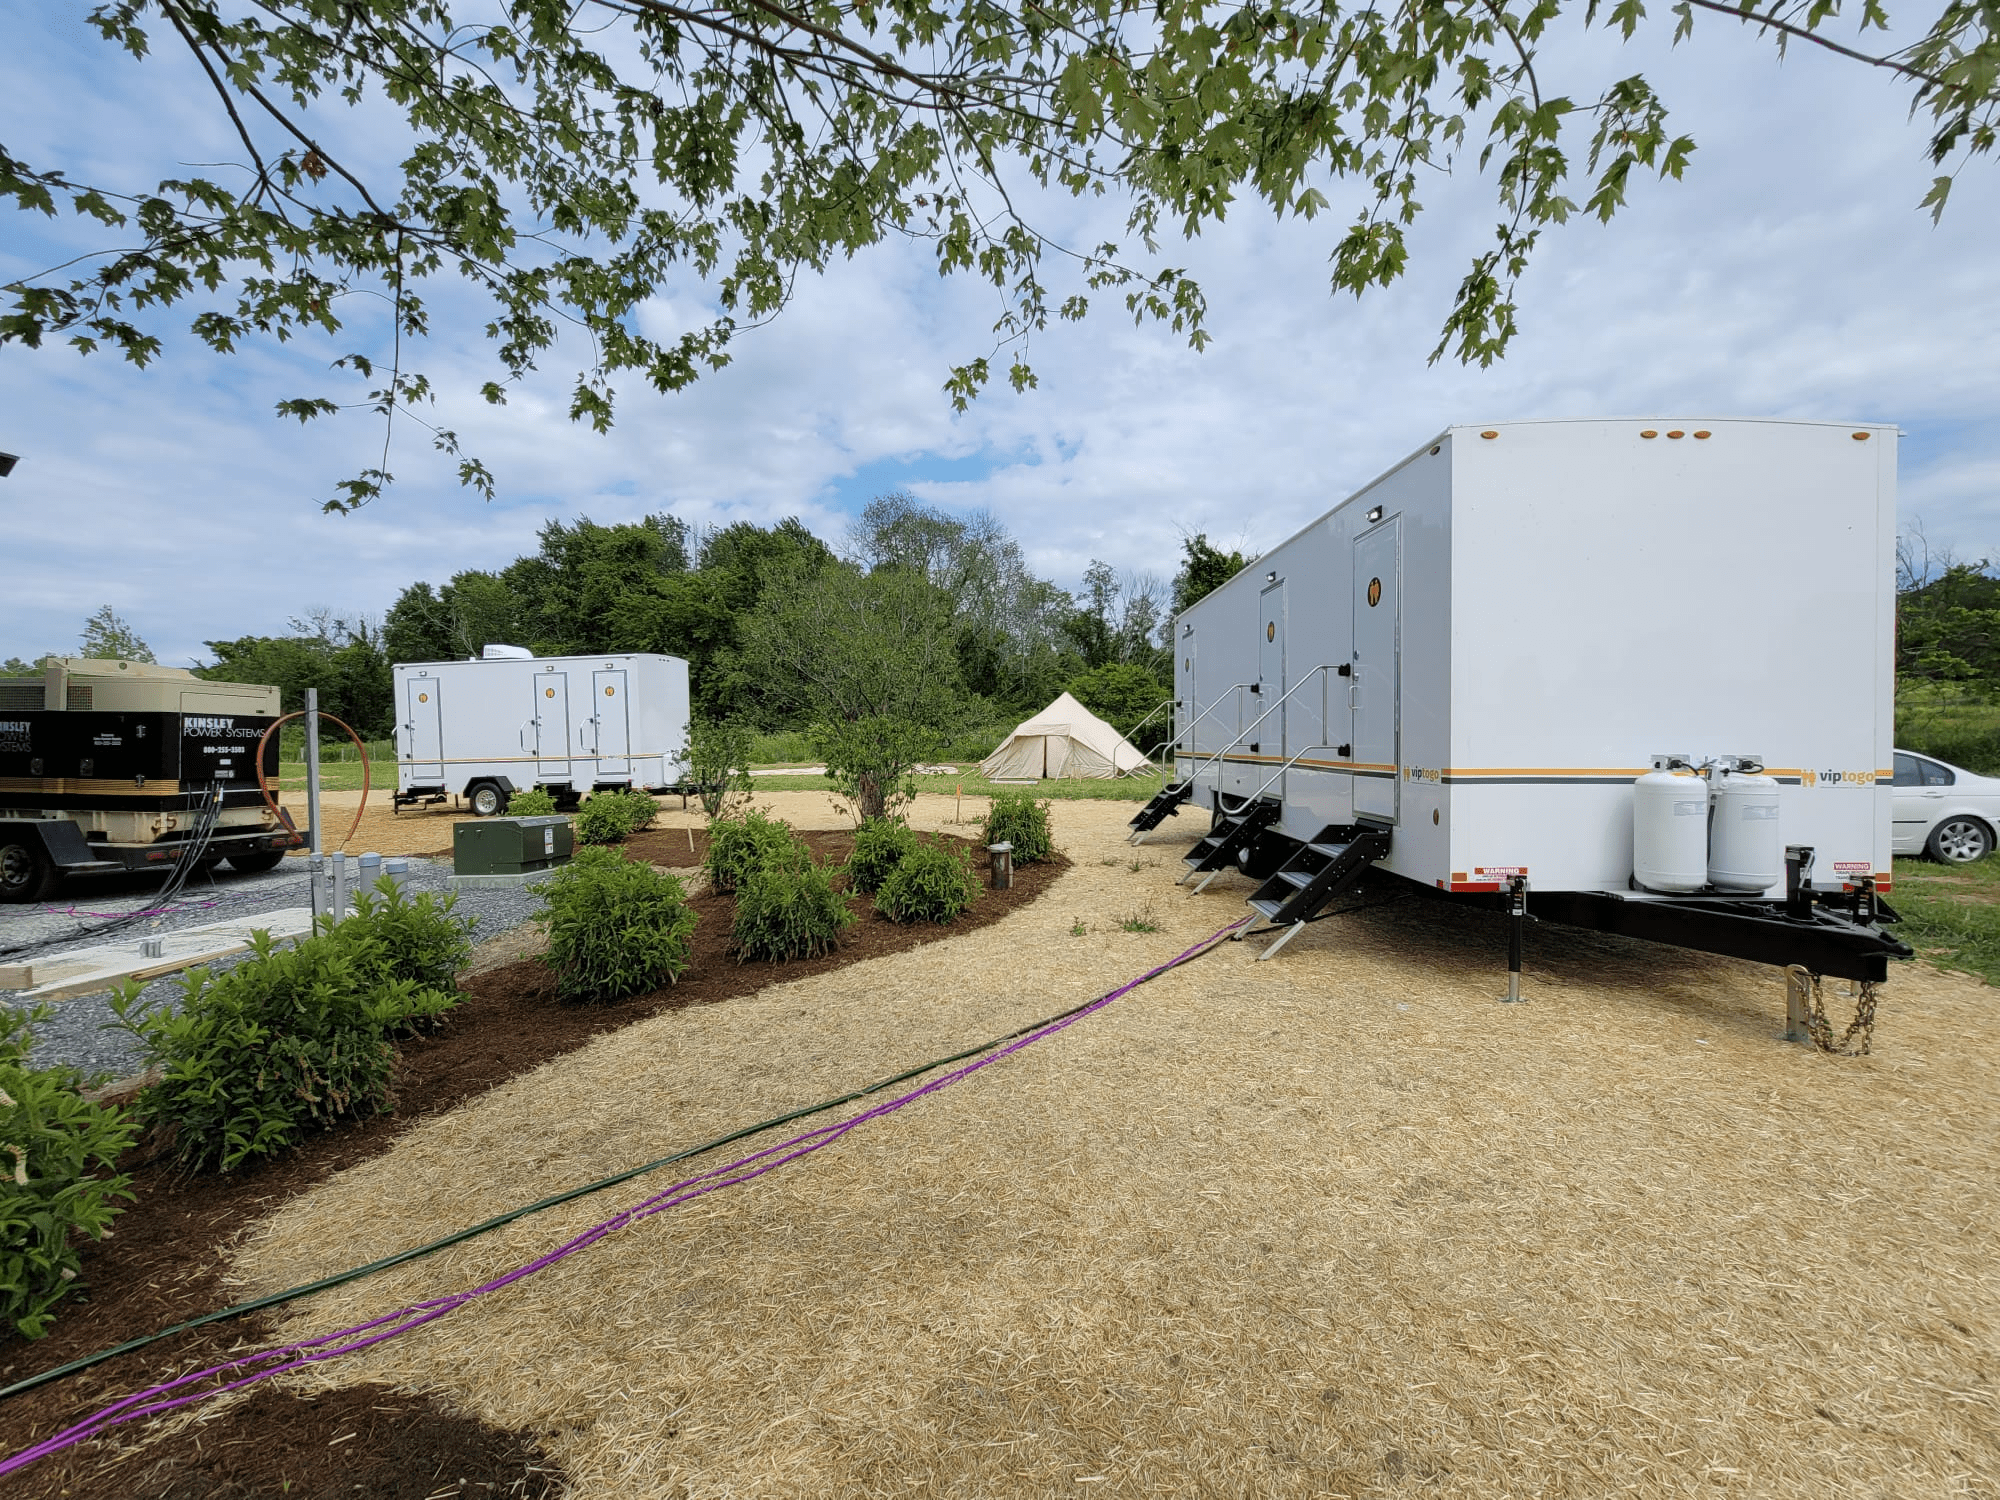 luxury restroom trailers at an outdoor event